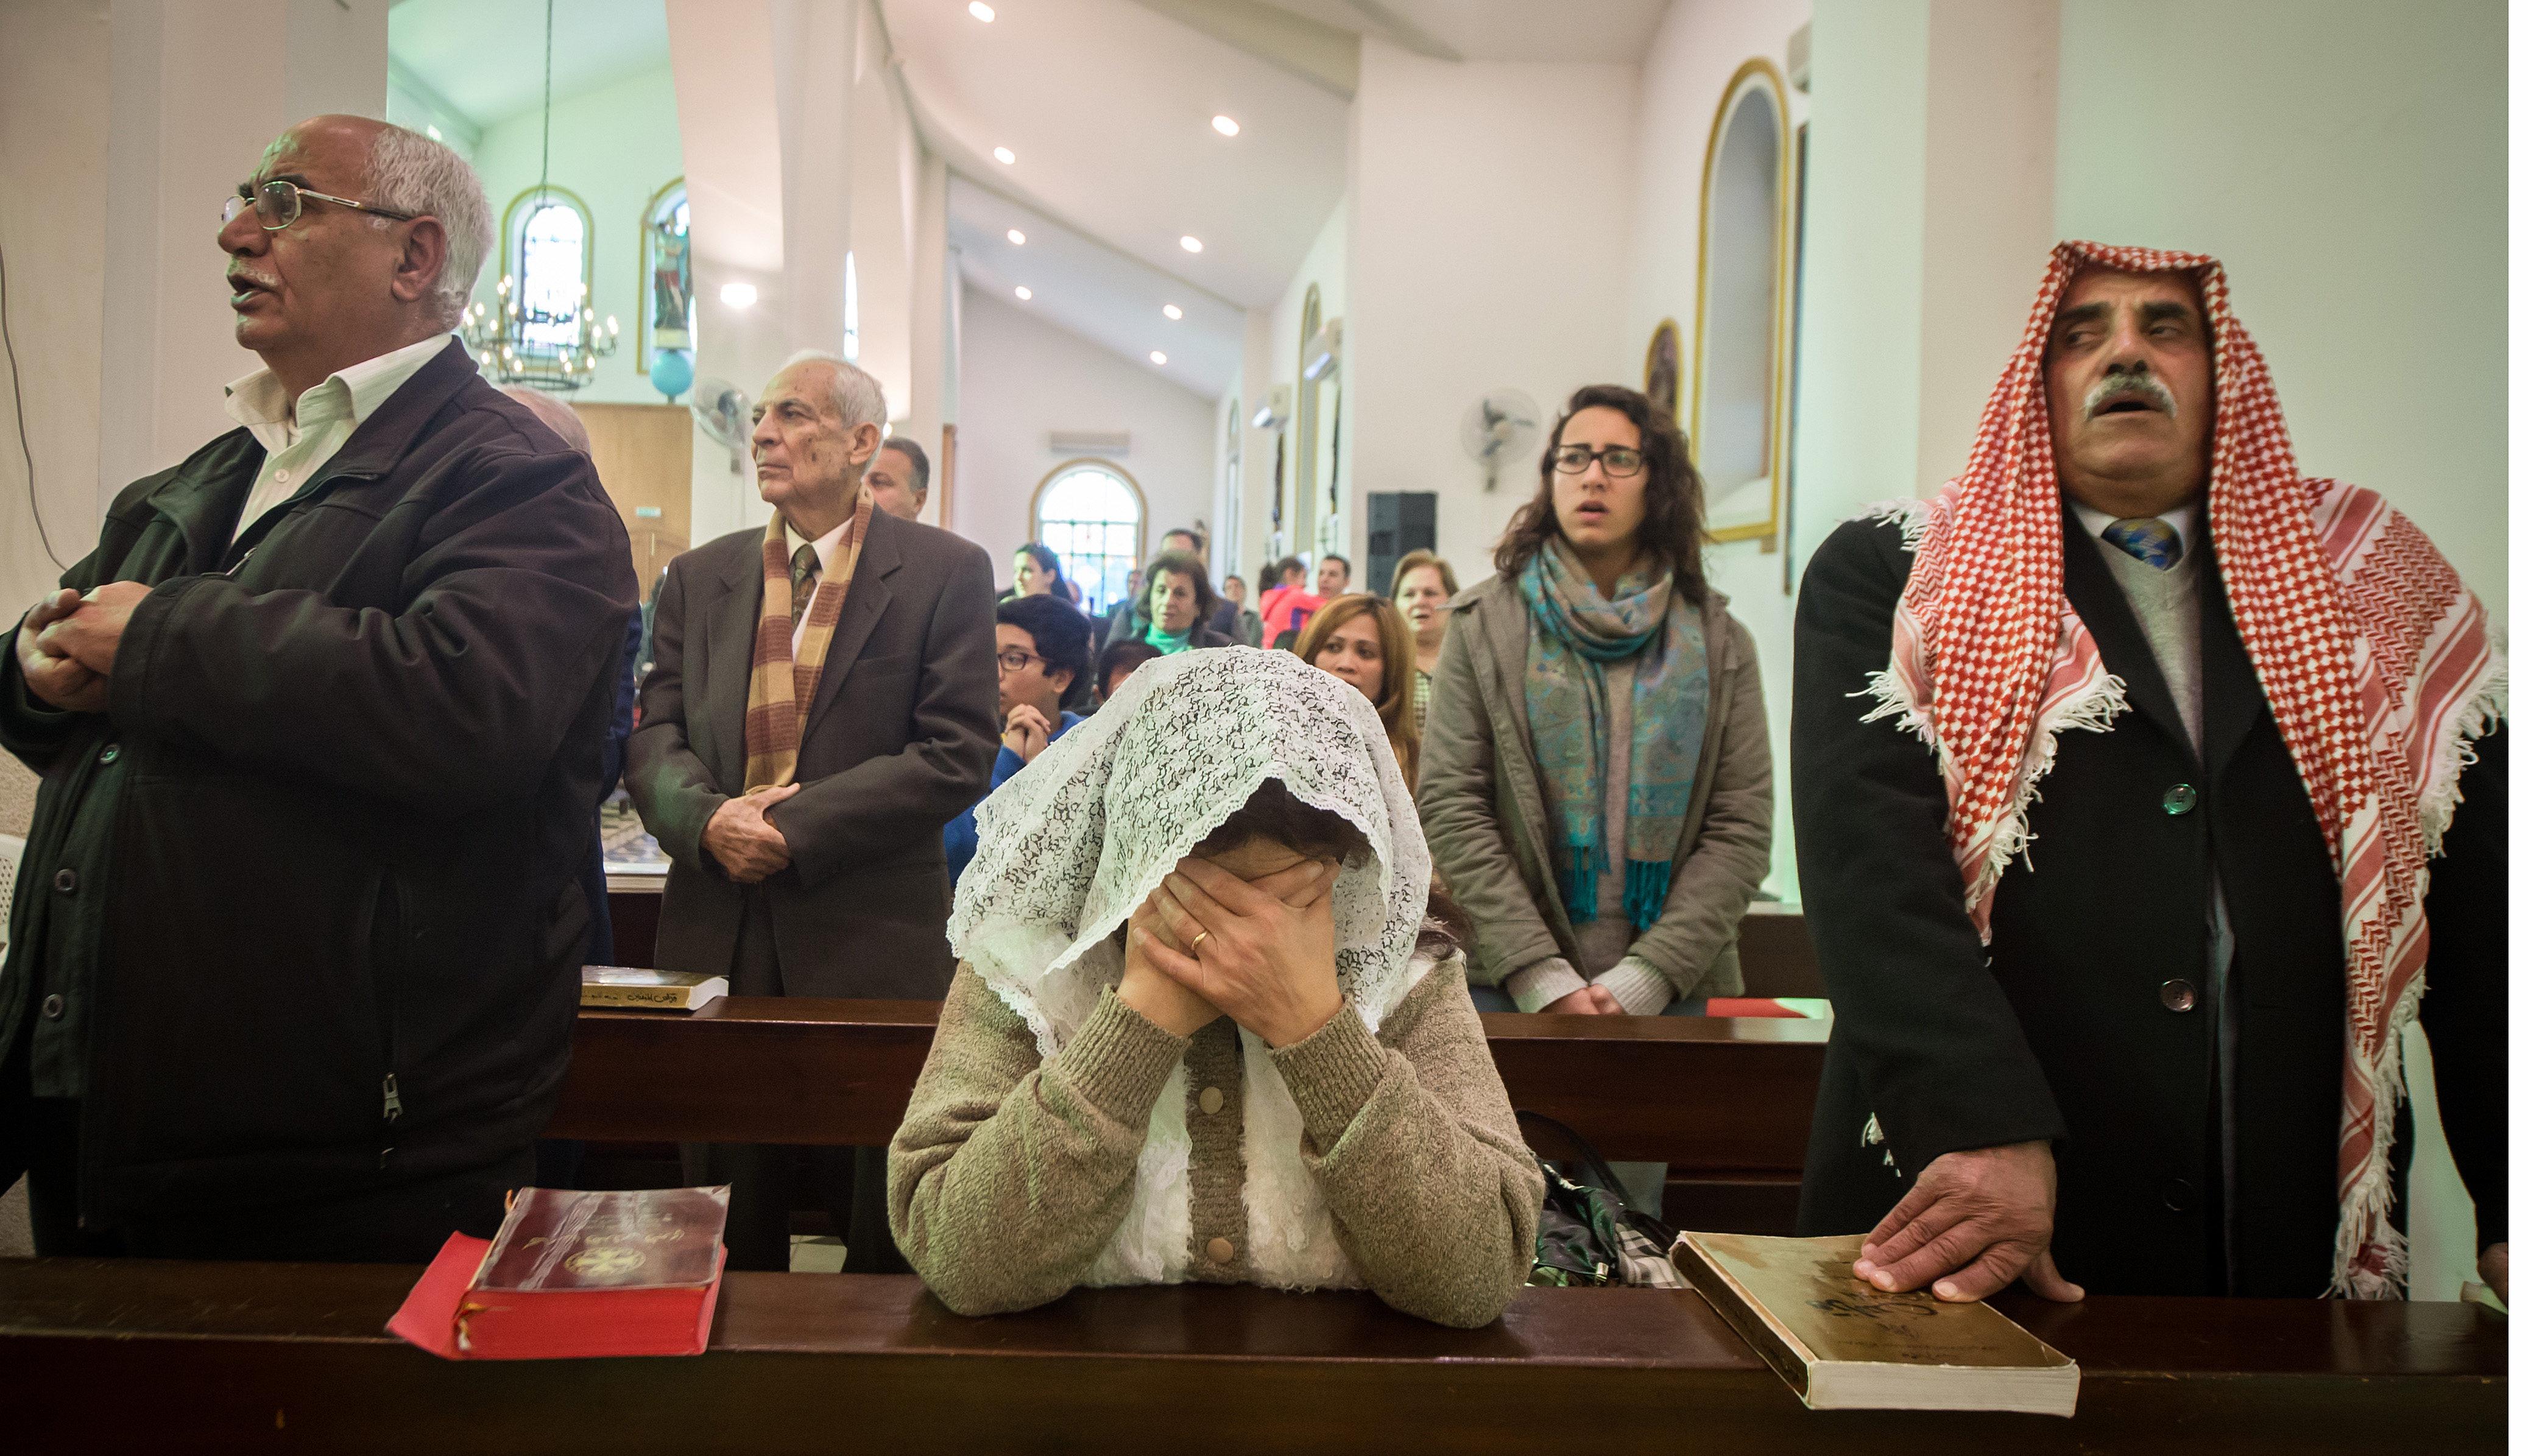 A day for Christians of East and West to pray with and for each other